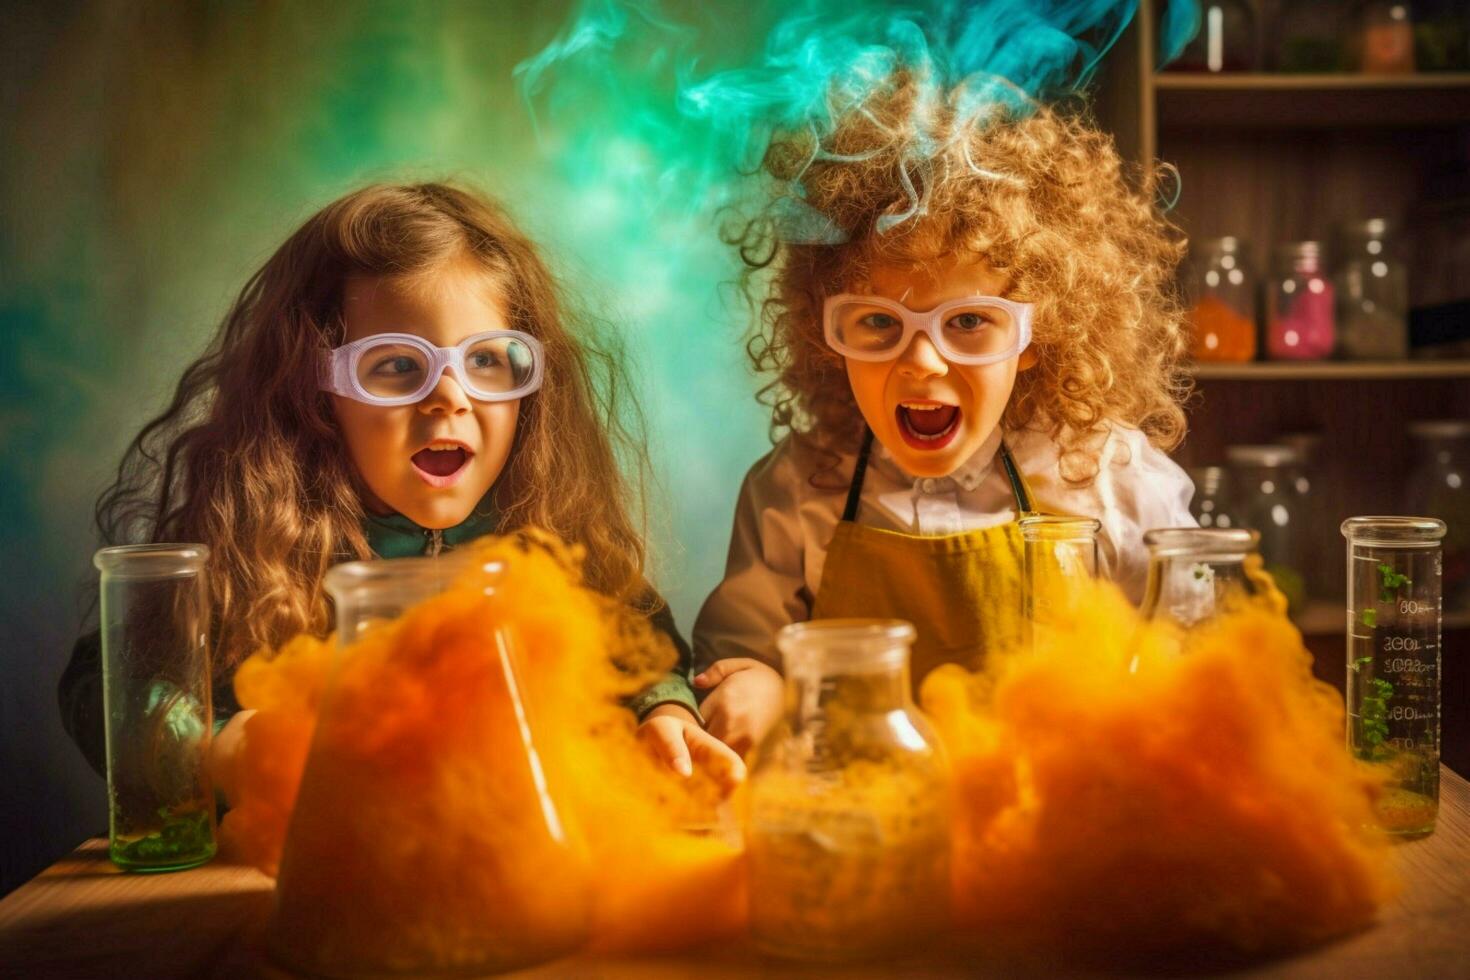 Kids having fun with science experiments photo